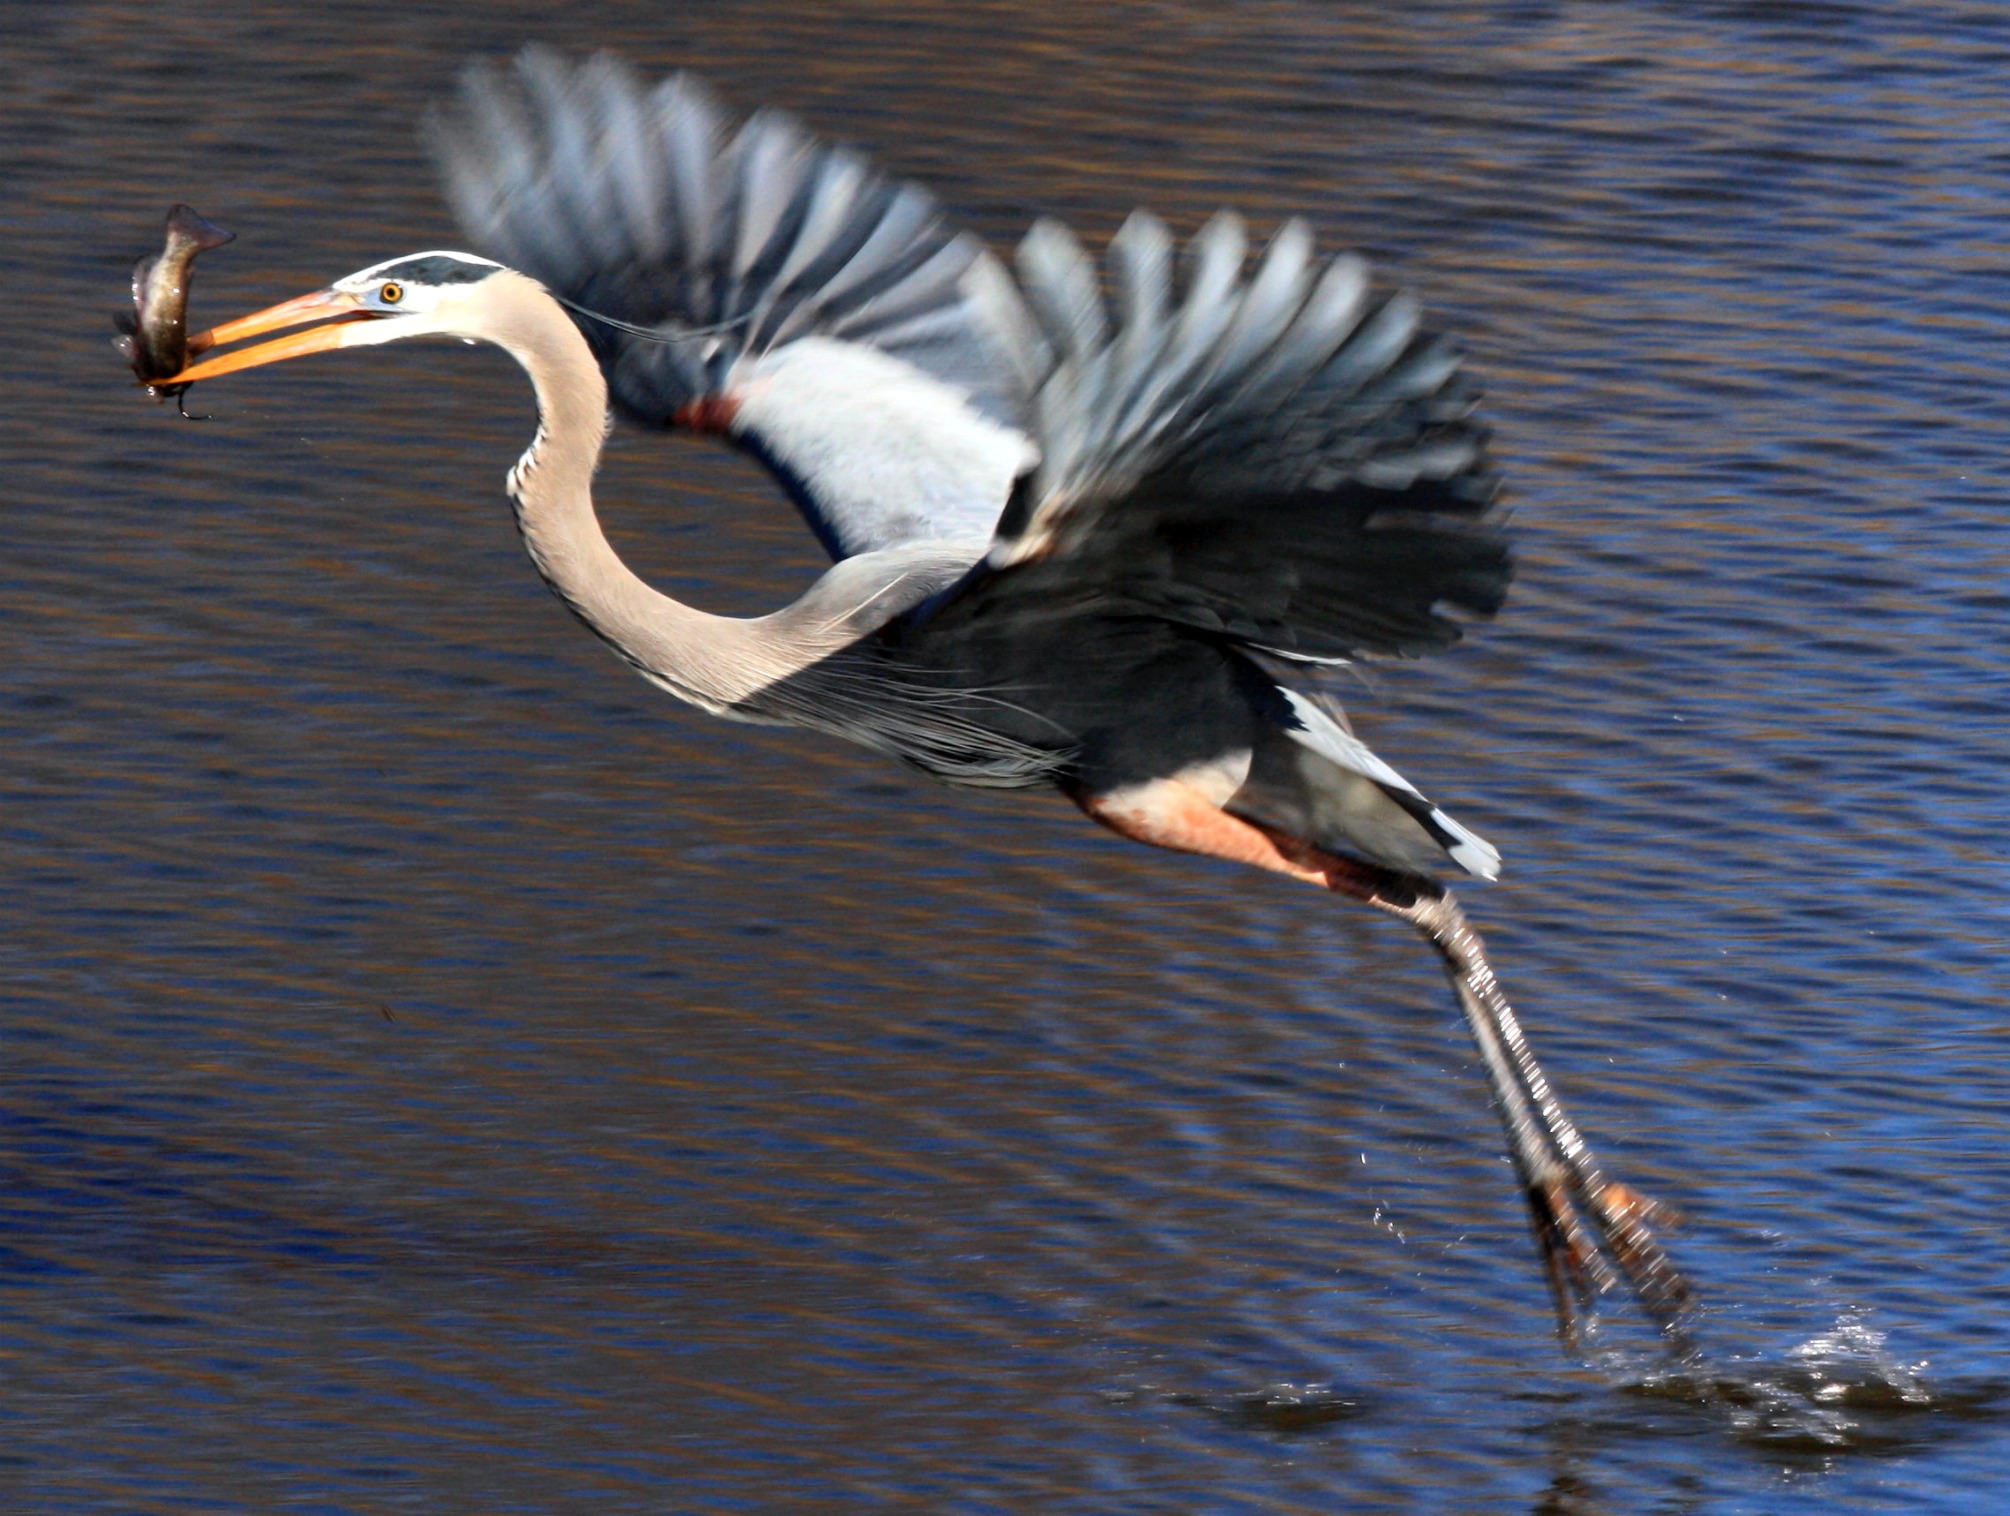 Heron Taking Off (user submitted)